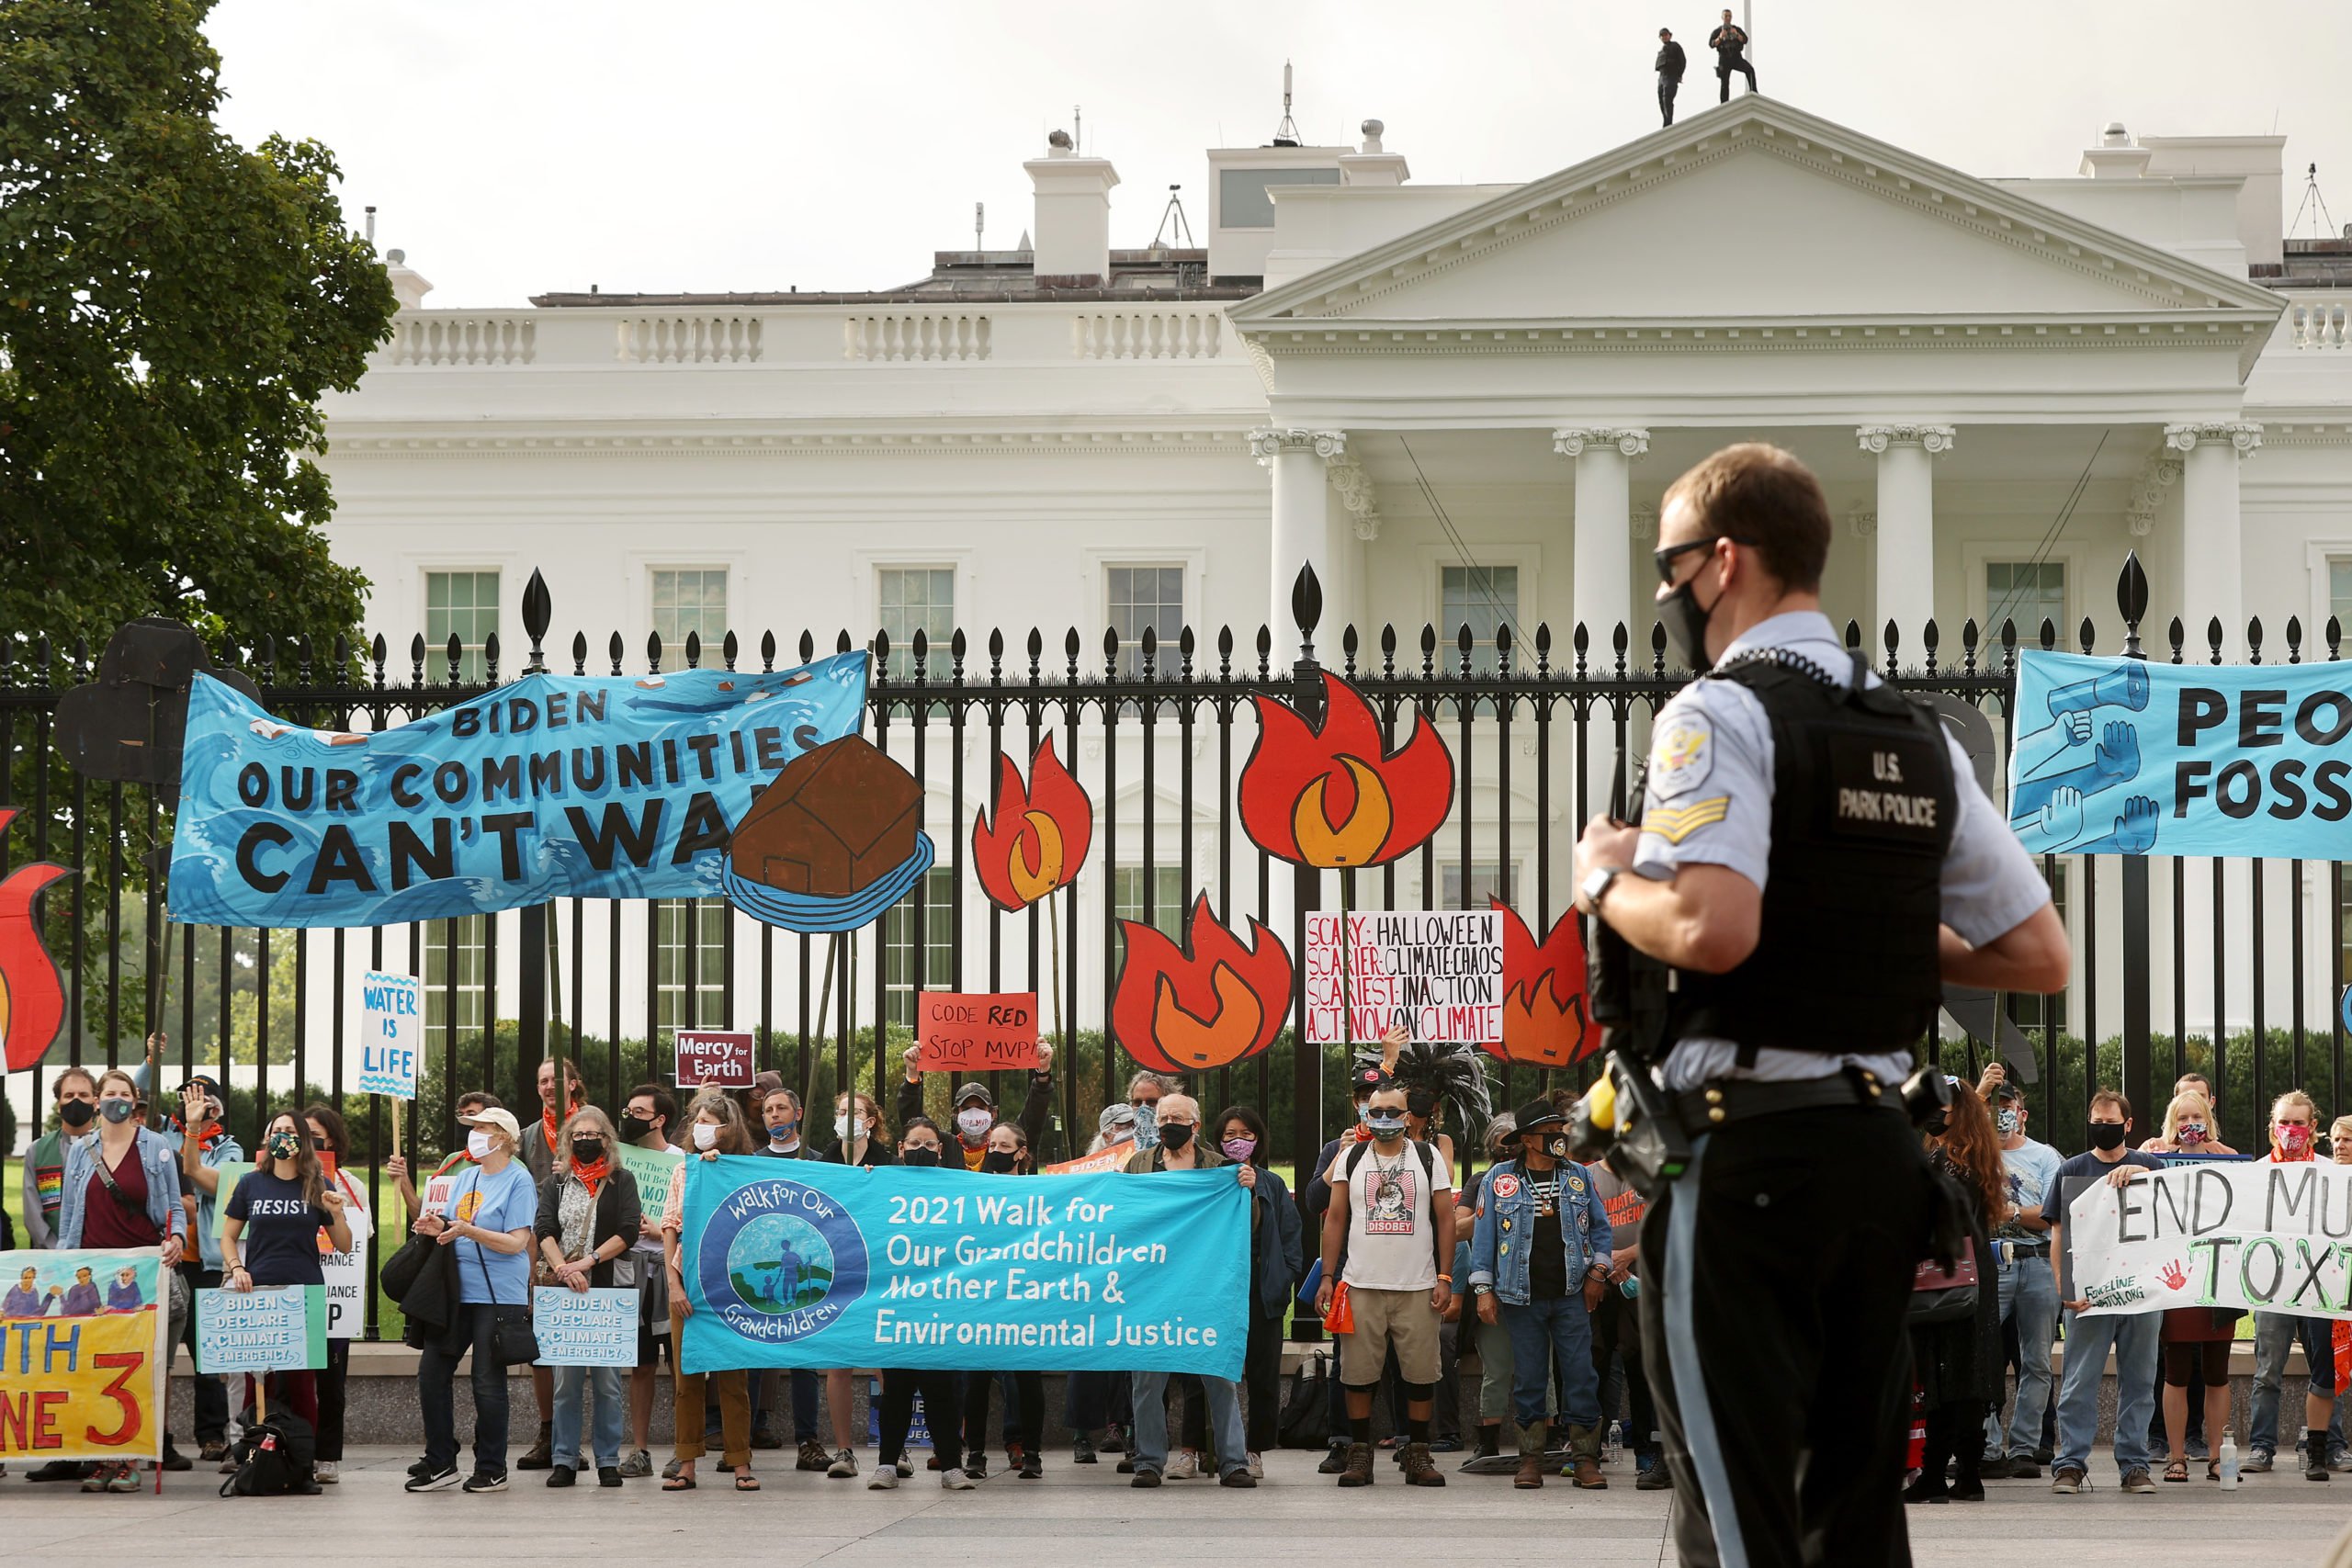 Demonstrators prepare to be arrested during a rally outside the White House as part of the 'Climate Chaos Is Happening Now' protest on Oct. 13. (Chip Somodevilla/Getty Images)